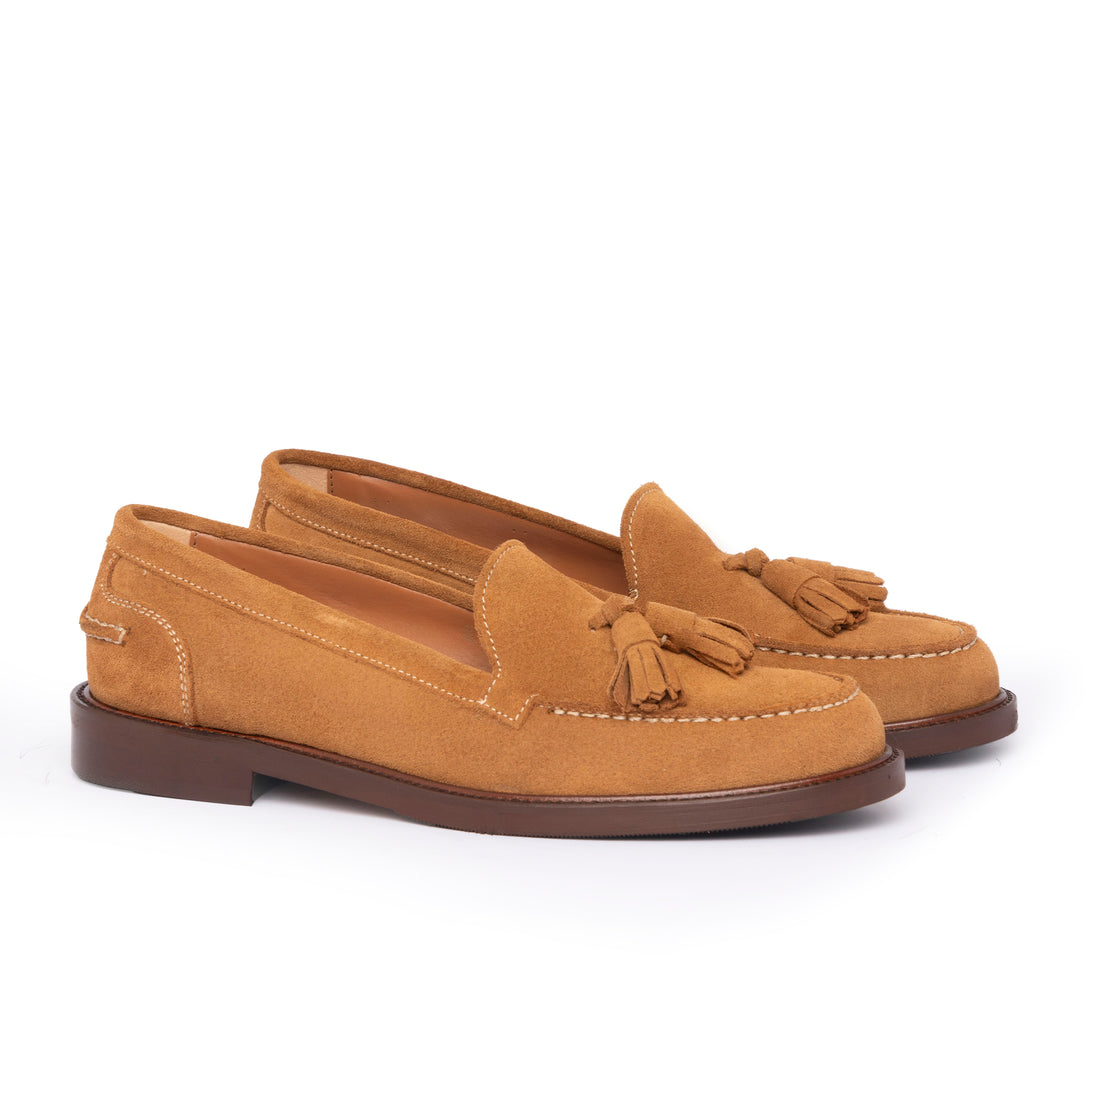 A104PN Women's Moccasins with bow in Suede - Leather